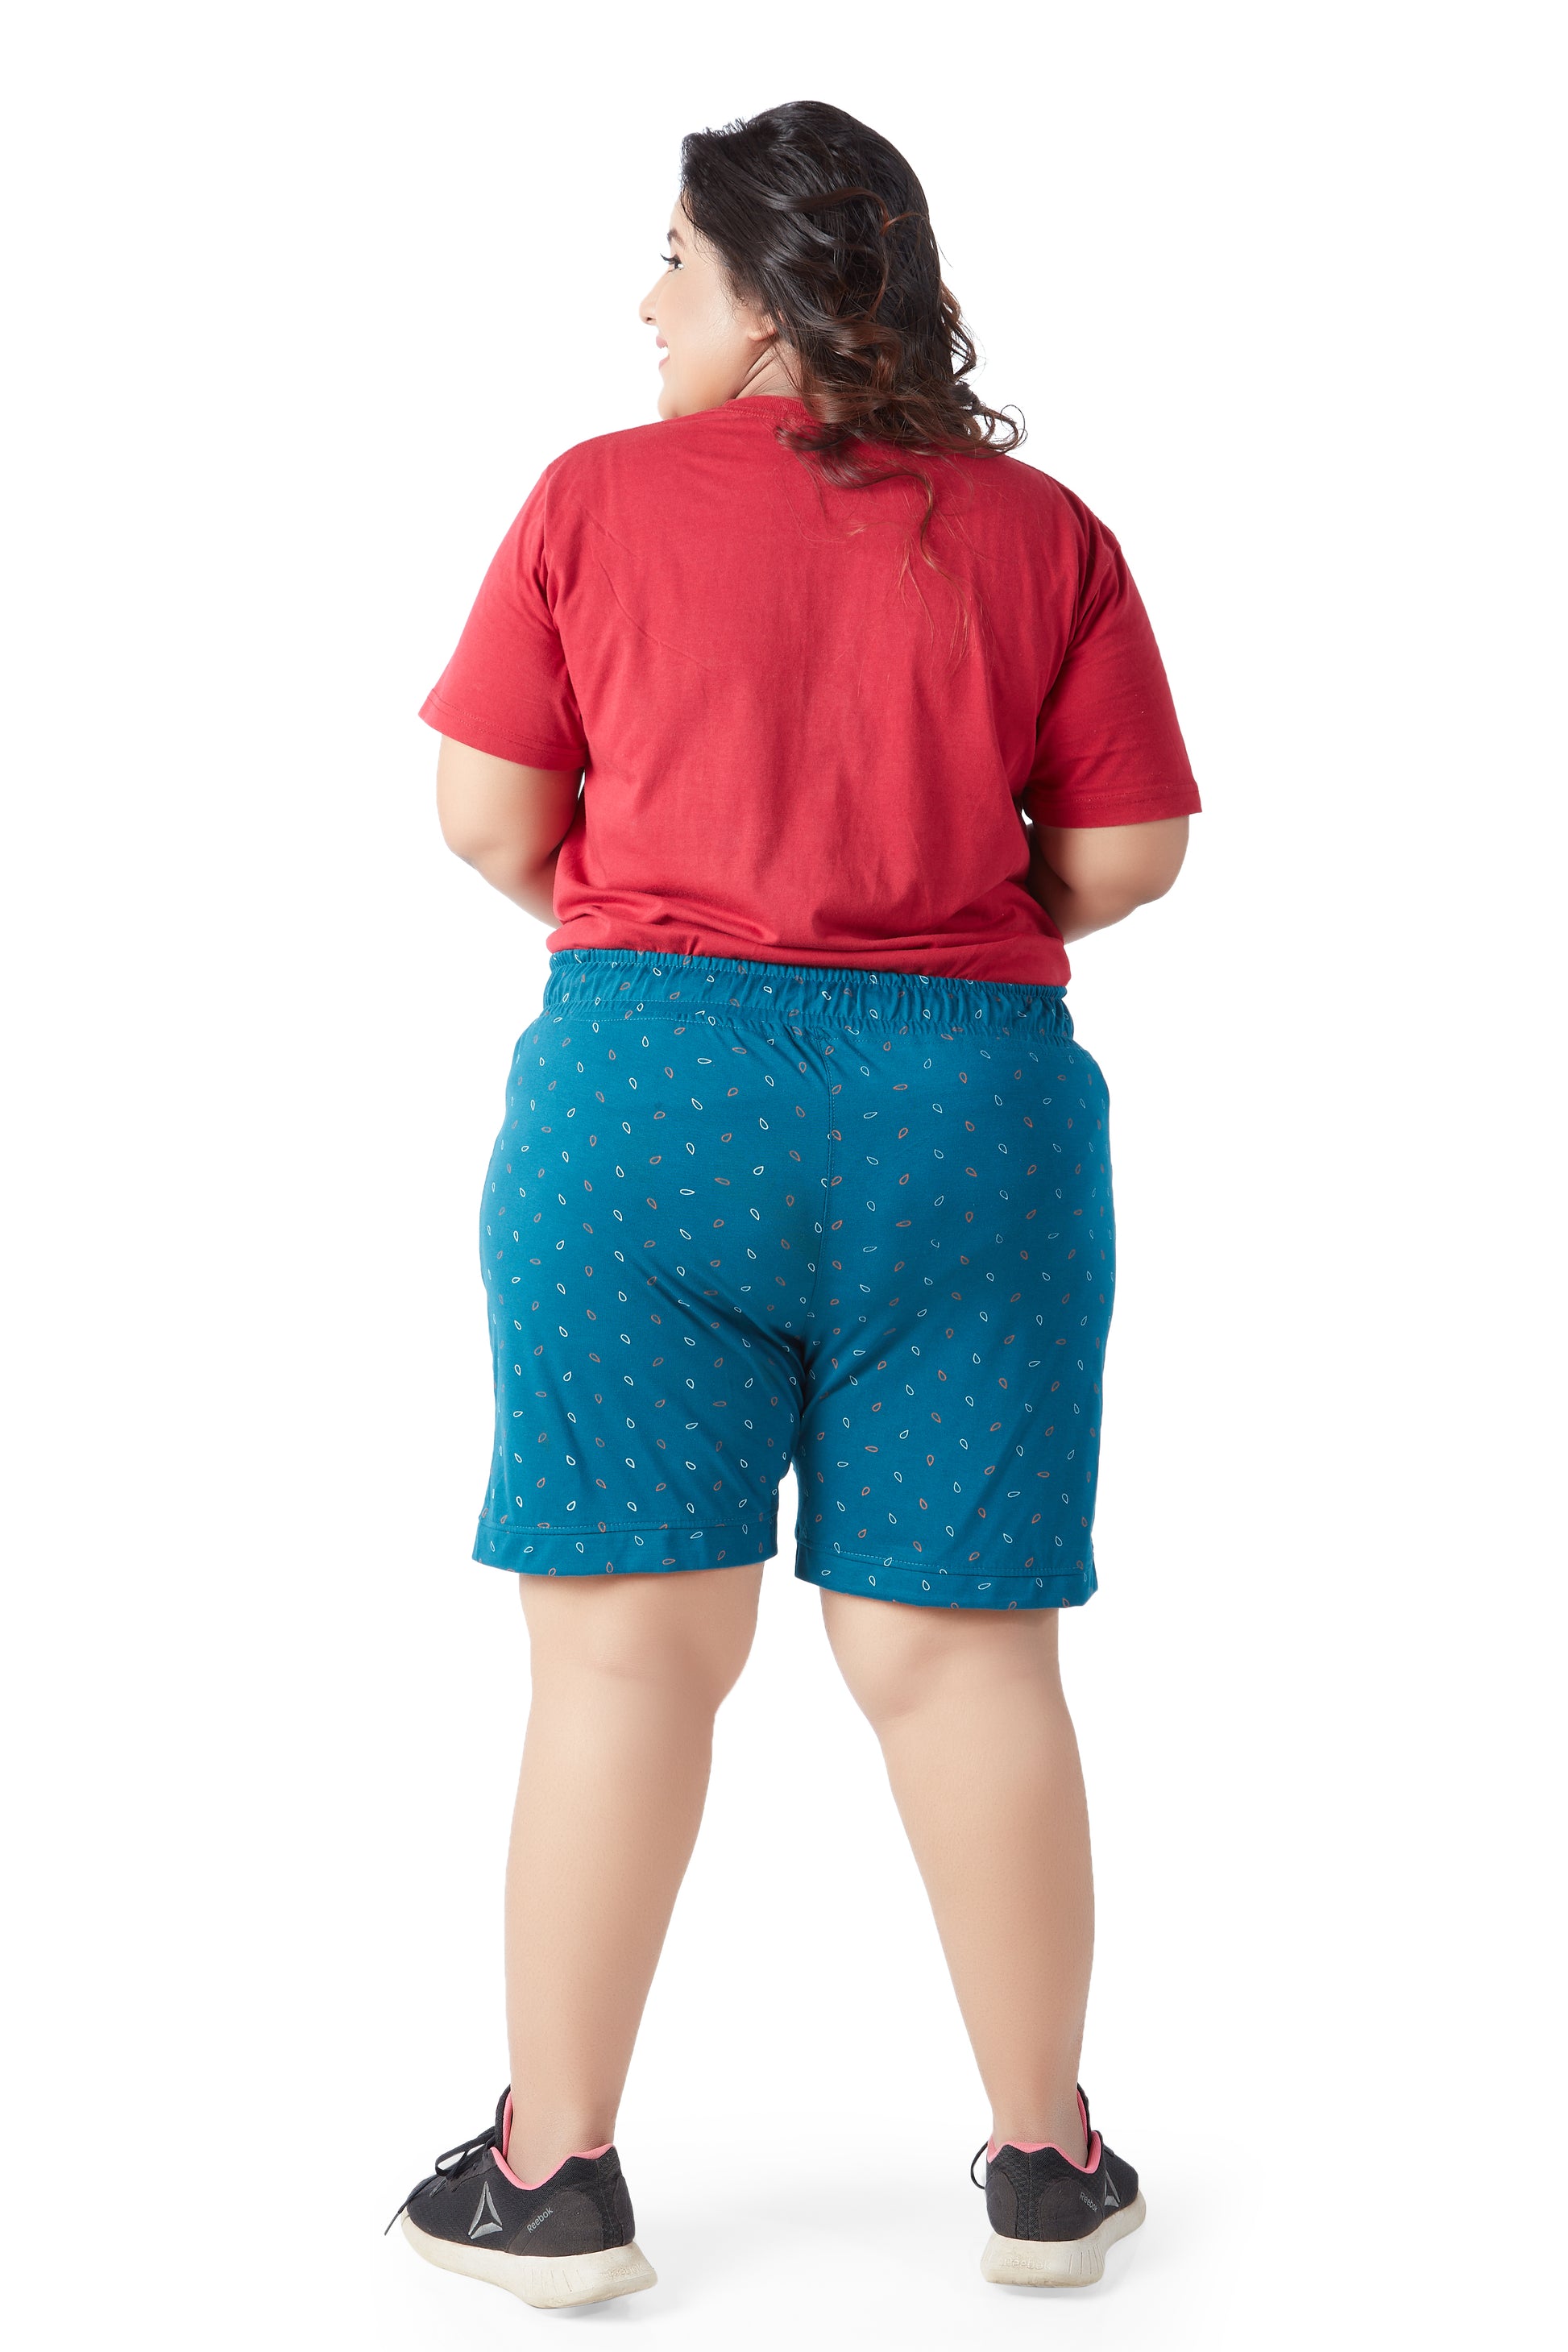 Comfortable Teal Blue Printed Bermuda Cotton Plus Size Shorts For Women Online In India